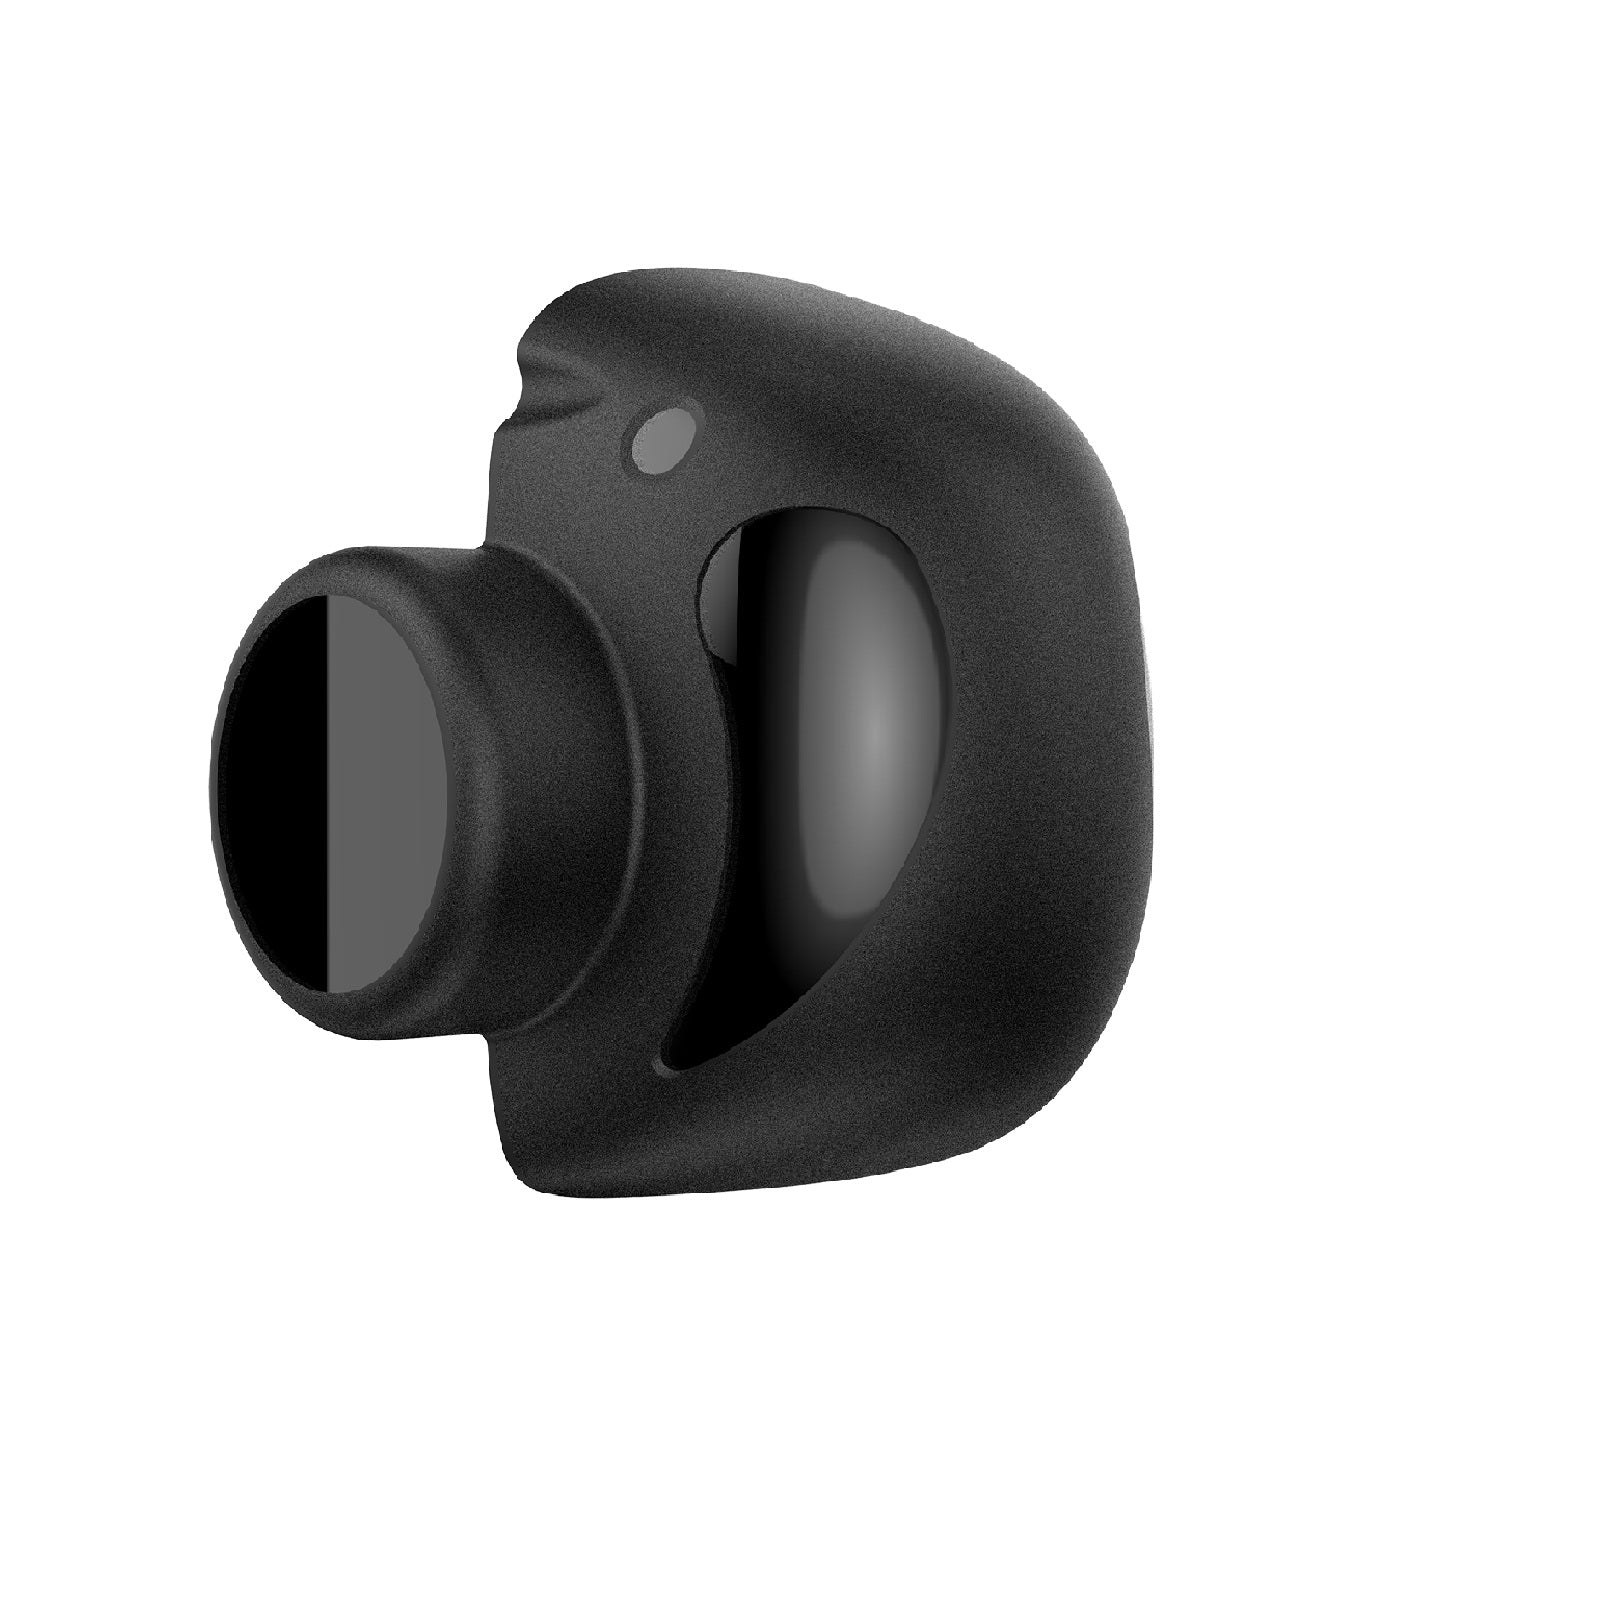 Gimbal Camera Lens Cover for DJI FPV UAV Cover Dust Anti-Scratch Protection Lens FPV Combo Drone Accessories